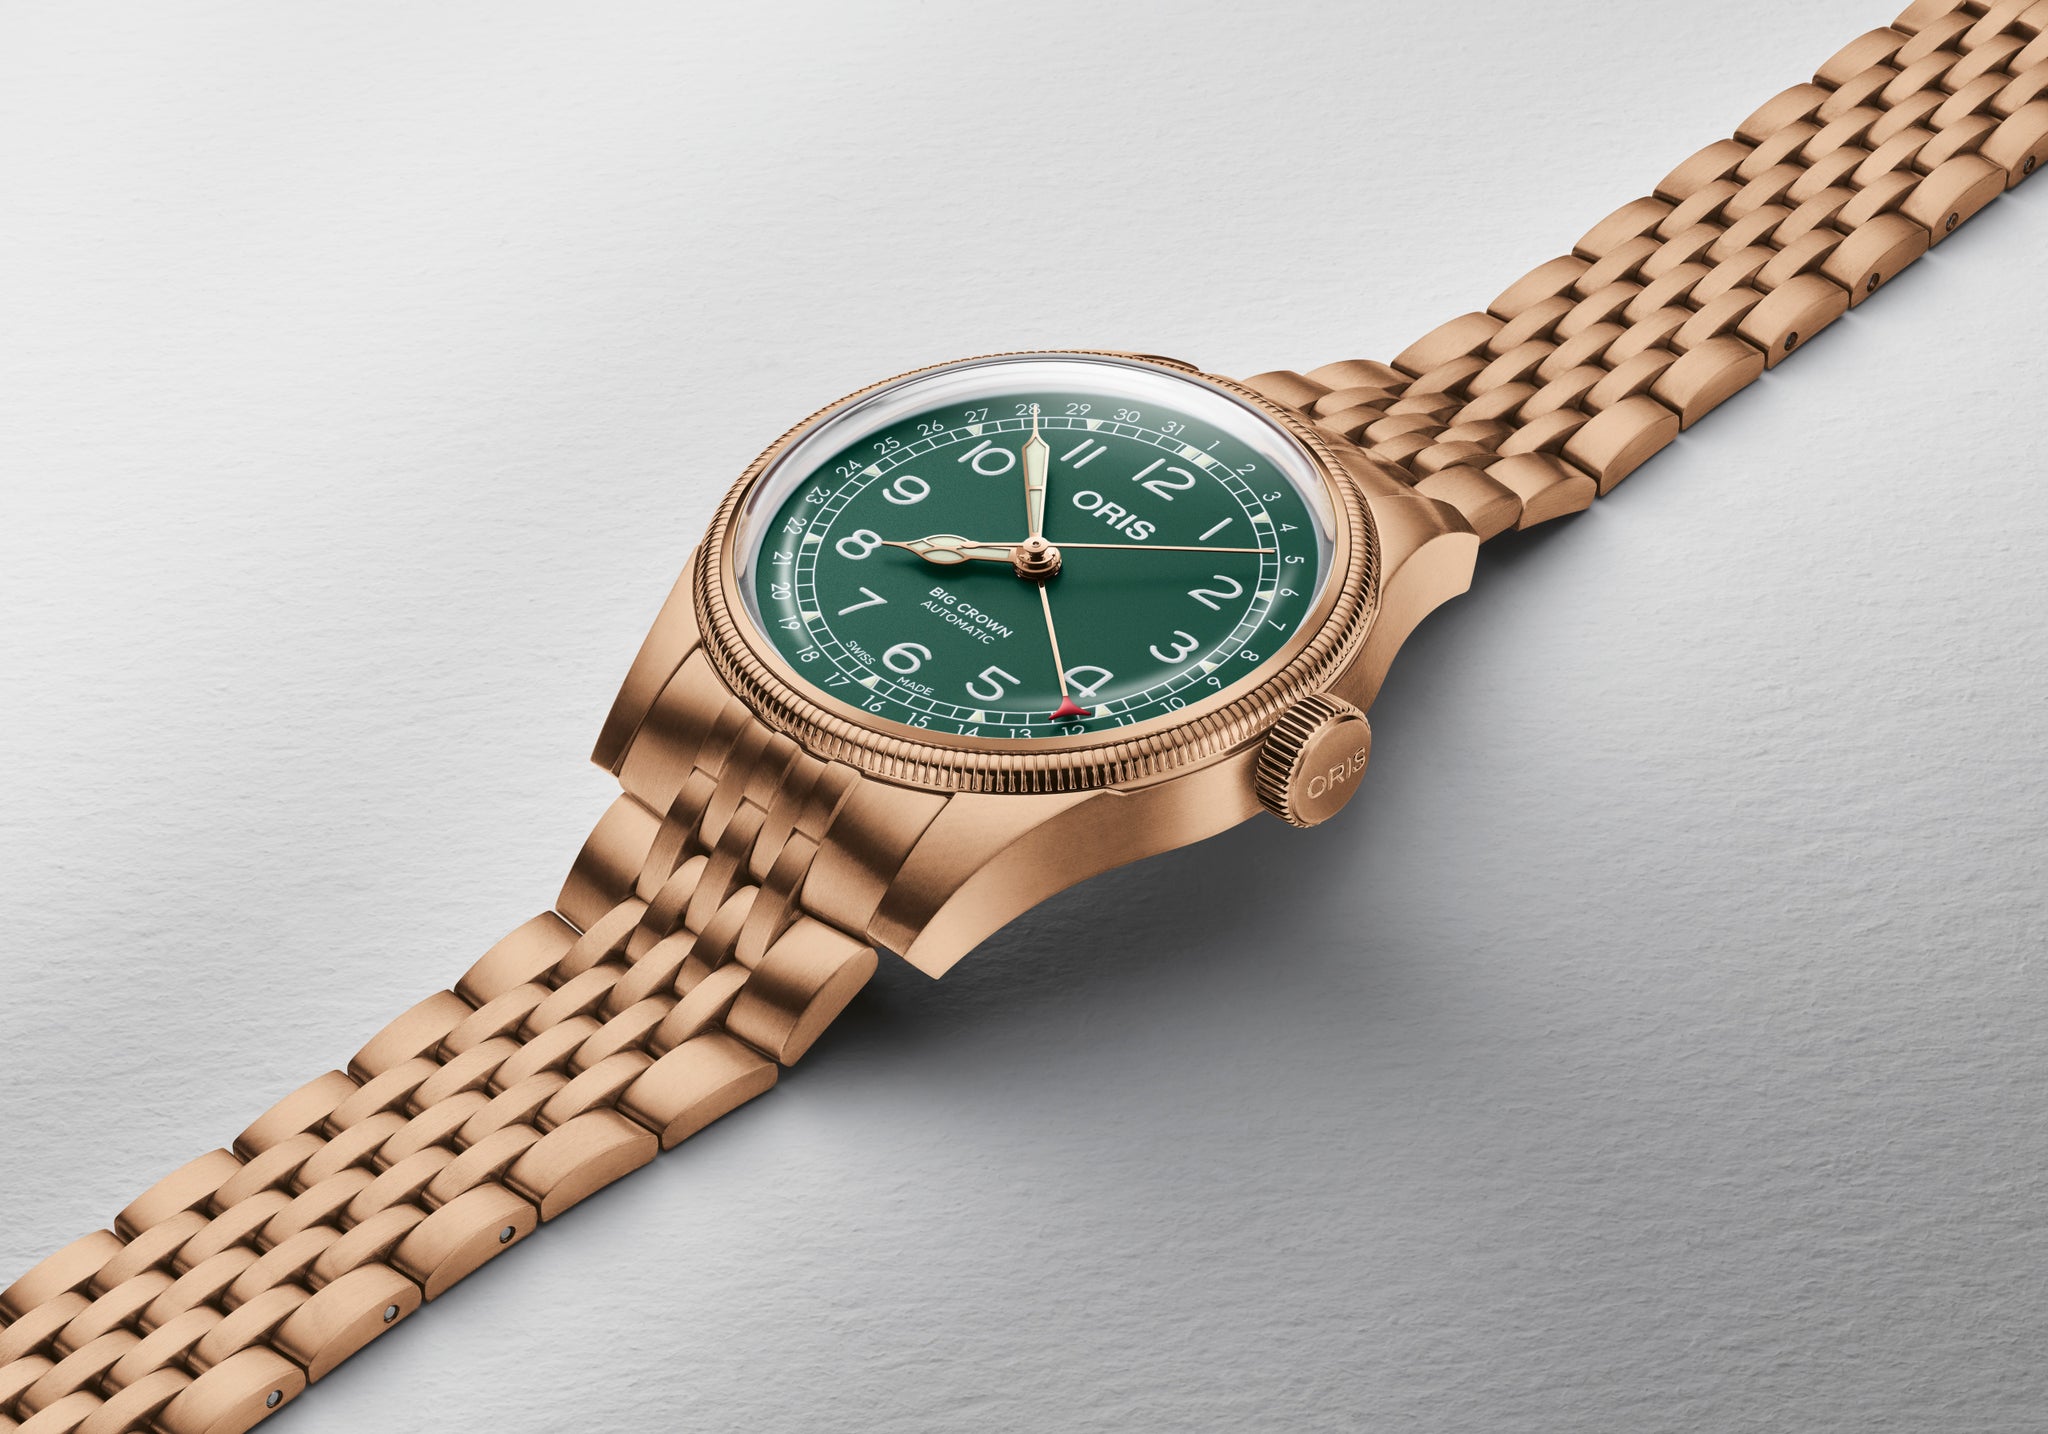 Oris Big Crown Pointer Date Bronze Automatic (Green Dial / 40mm)